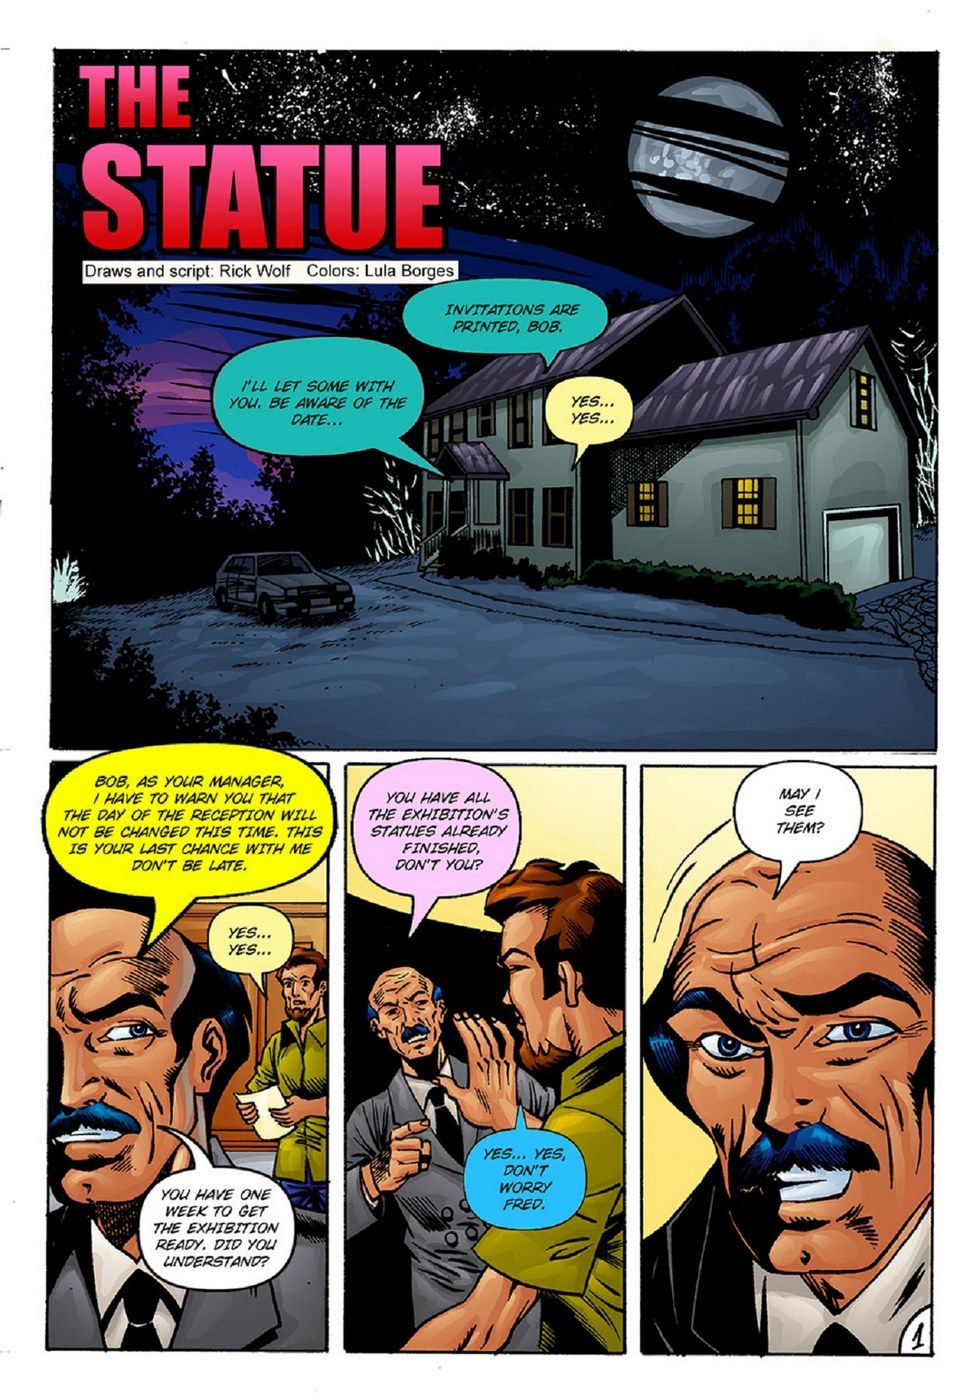 [Rick Wolf] The Statue Western erotic page 2